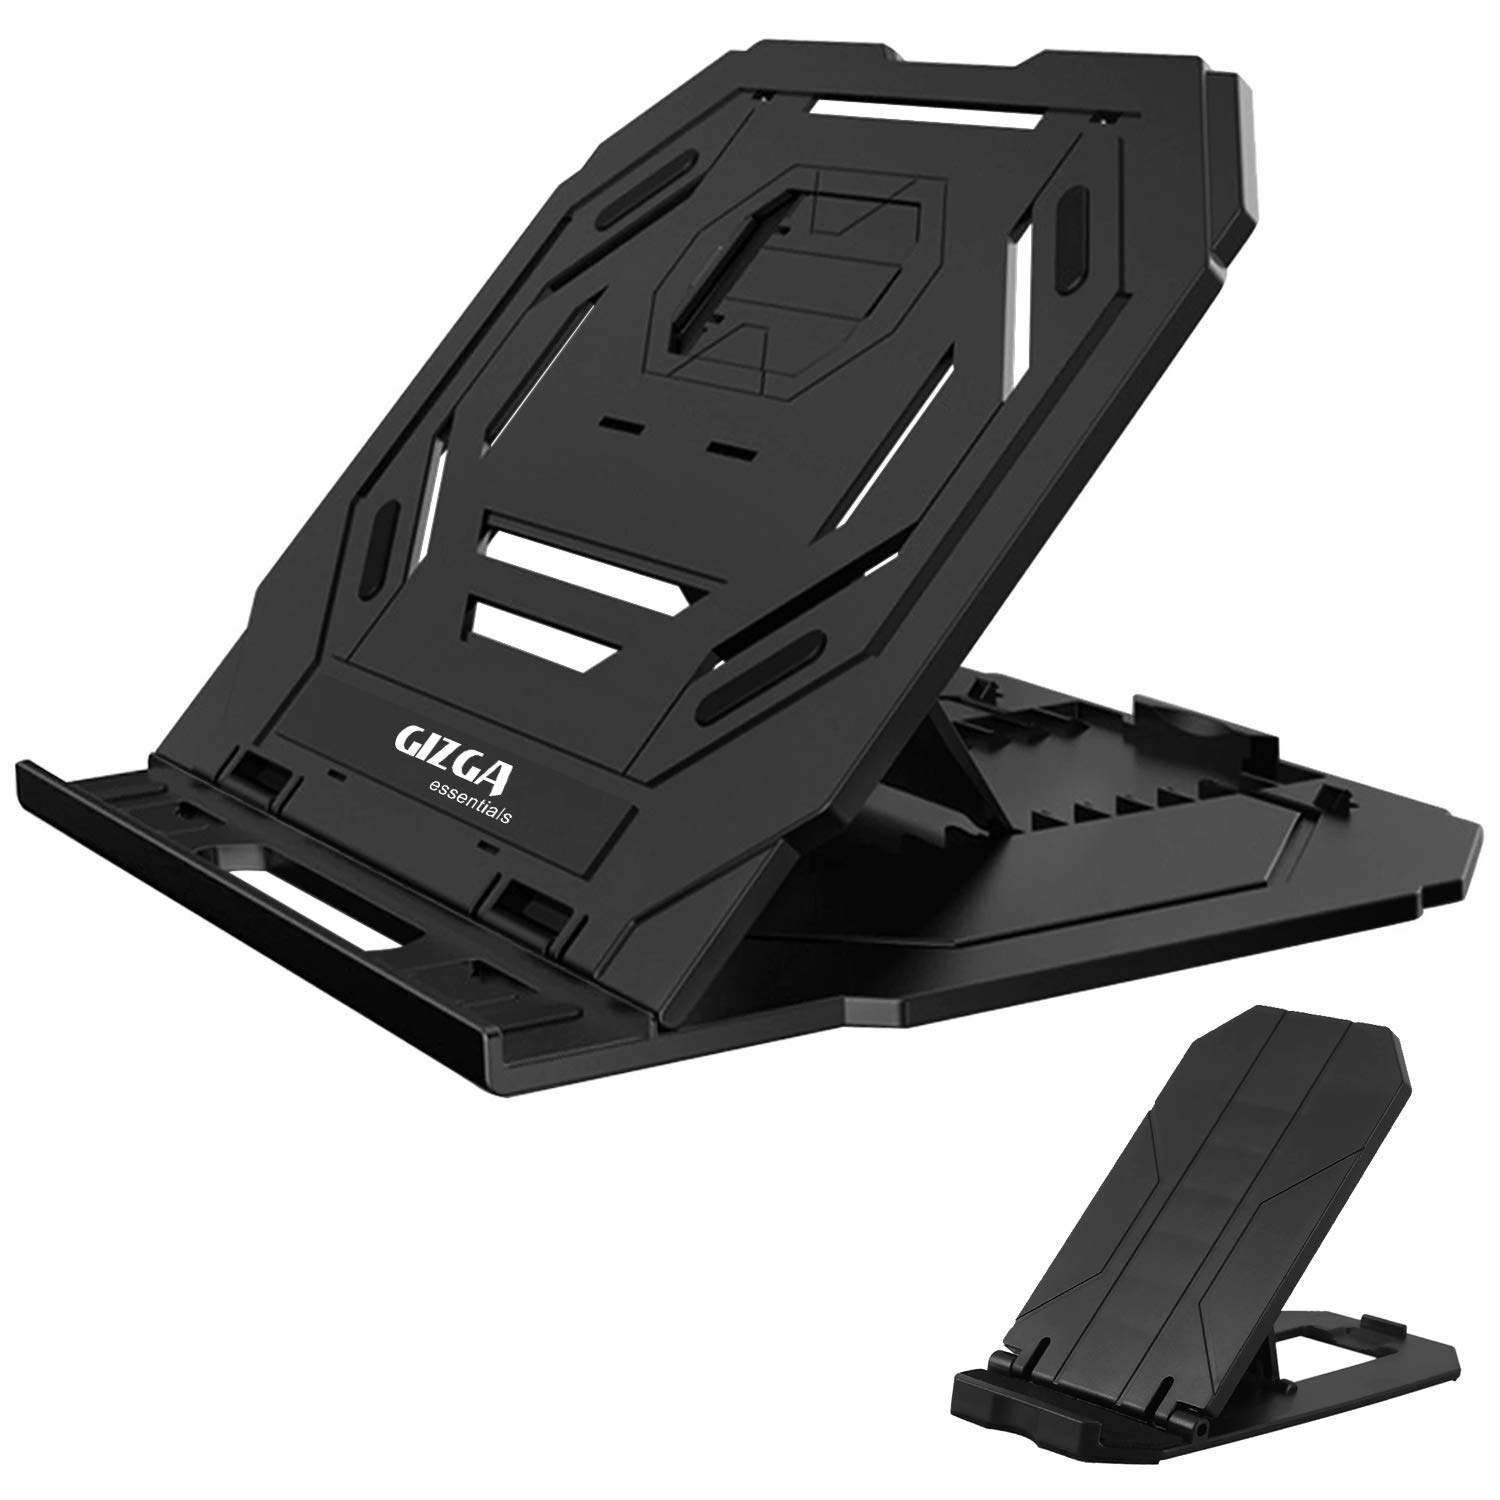 Gizga Laptop Stand and Mobile Stand 